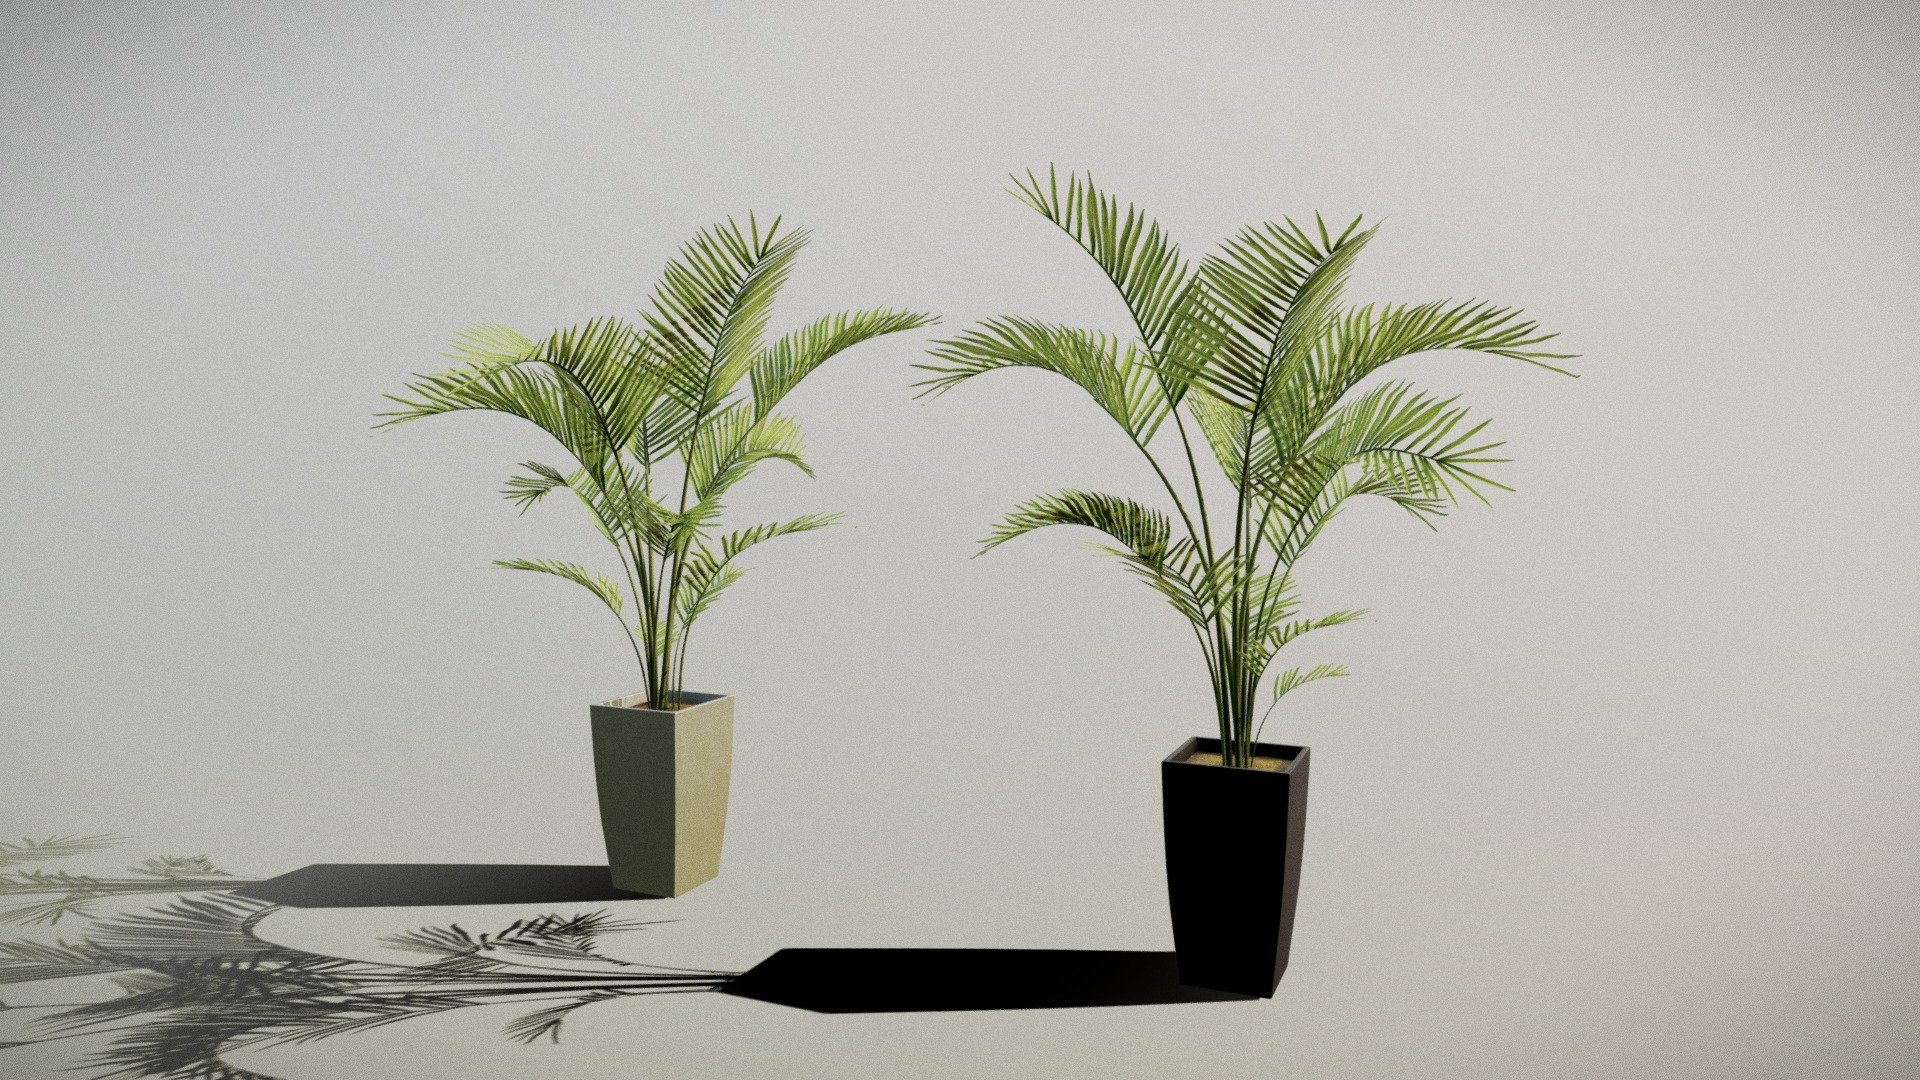 Details

4K textures

2 variations

Ready for Real time Archviz

2 materials for the plant and 1 per pot.

Contact me for any issue or questions! https://www.artstation.com/bpaul/profile - Pot (Palm) - Buy Royalty Free 3D model by Paul (@nathan.d1563) 3d model